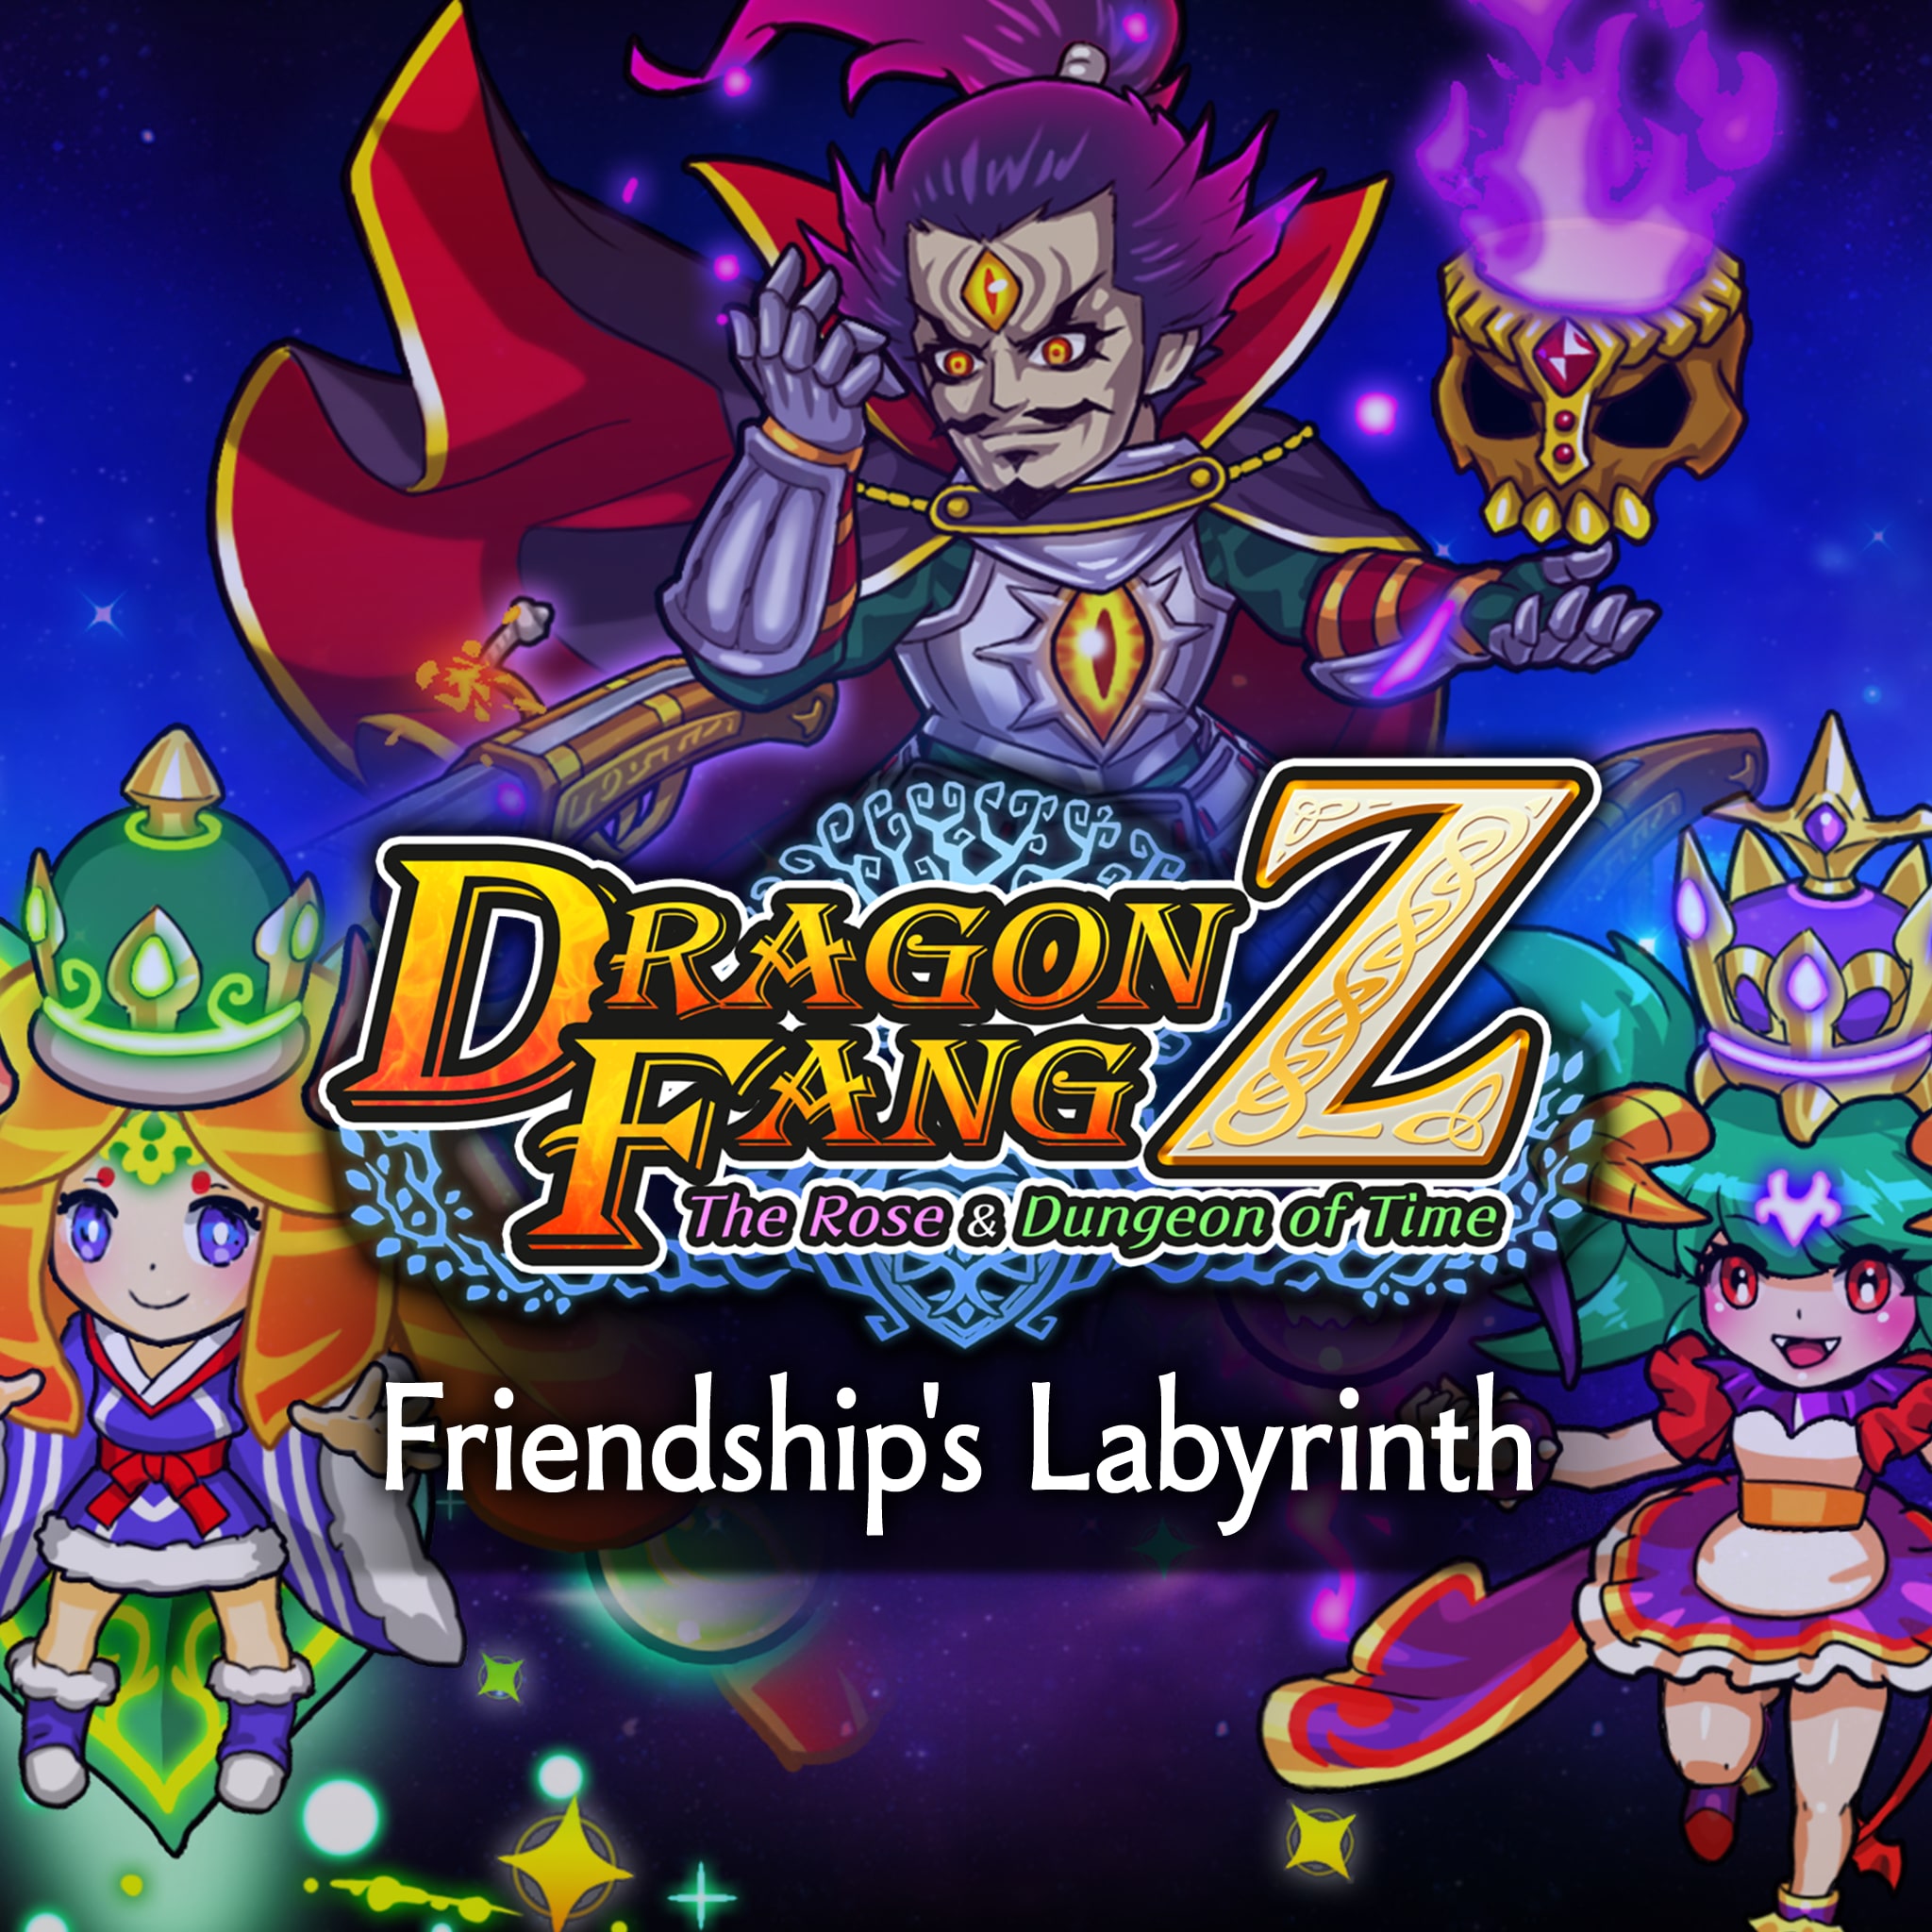 DragonFangZ - Extra Dungeon 'Friendship's Labyrinth'